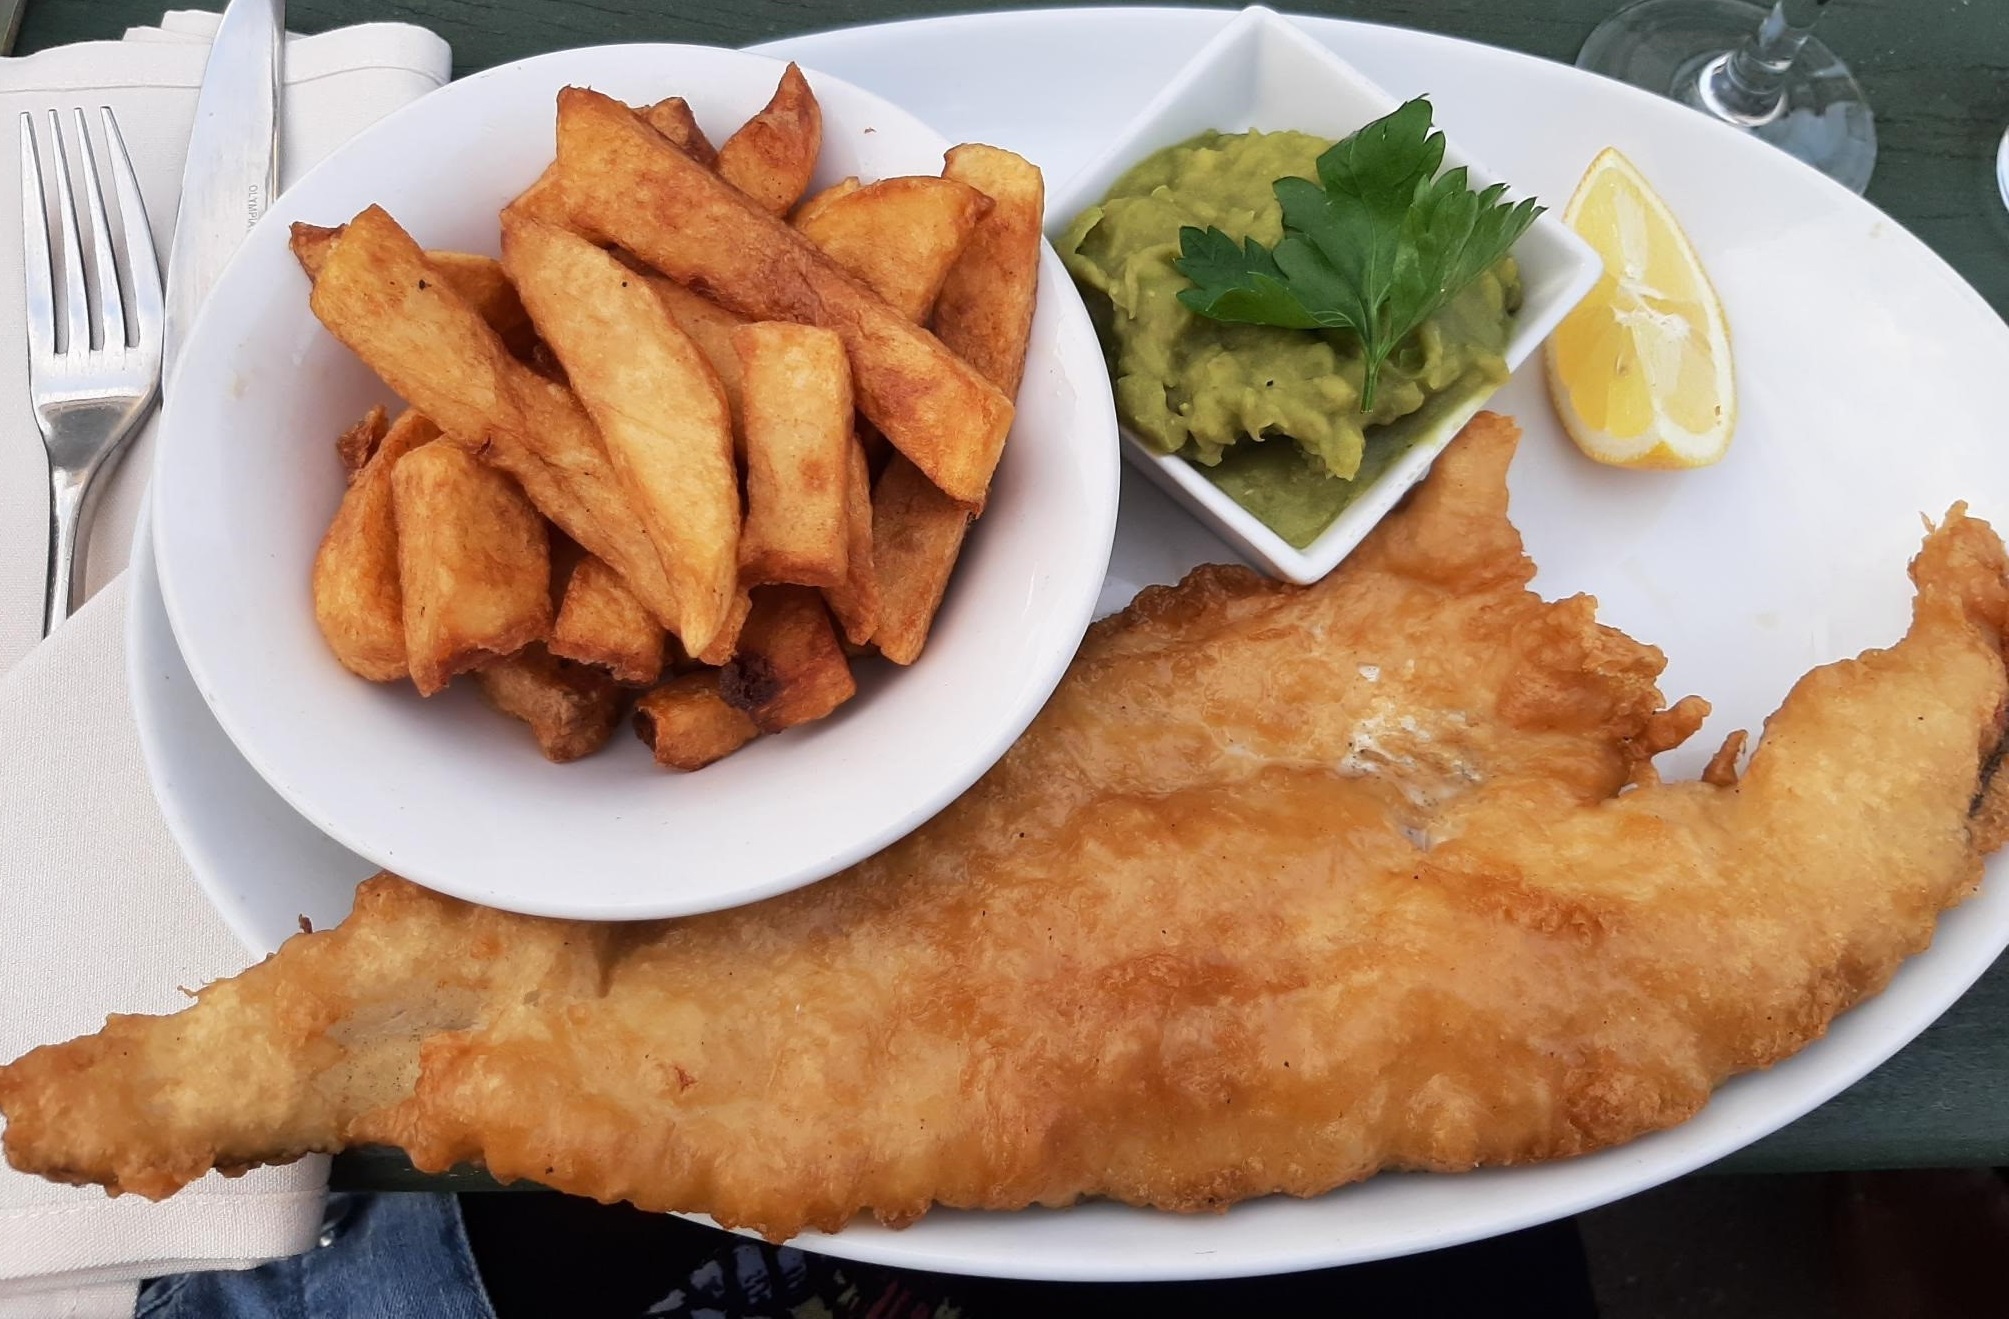 Haddock and chips at The Kings Arms, Sandhutton